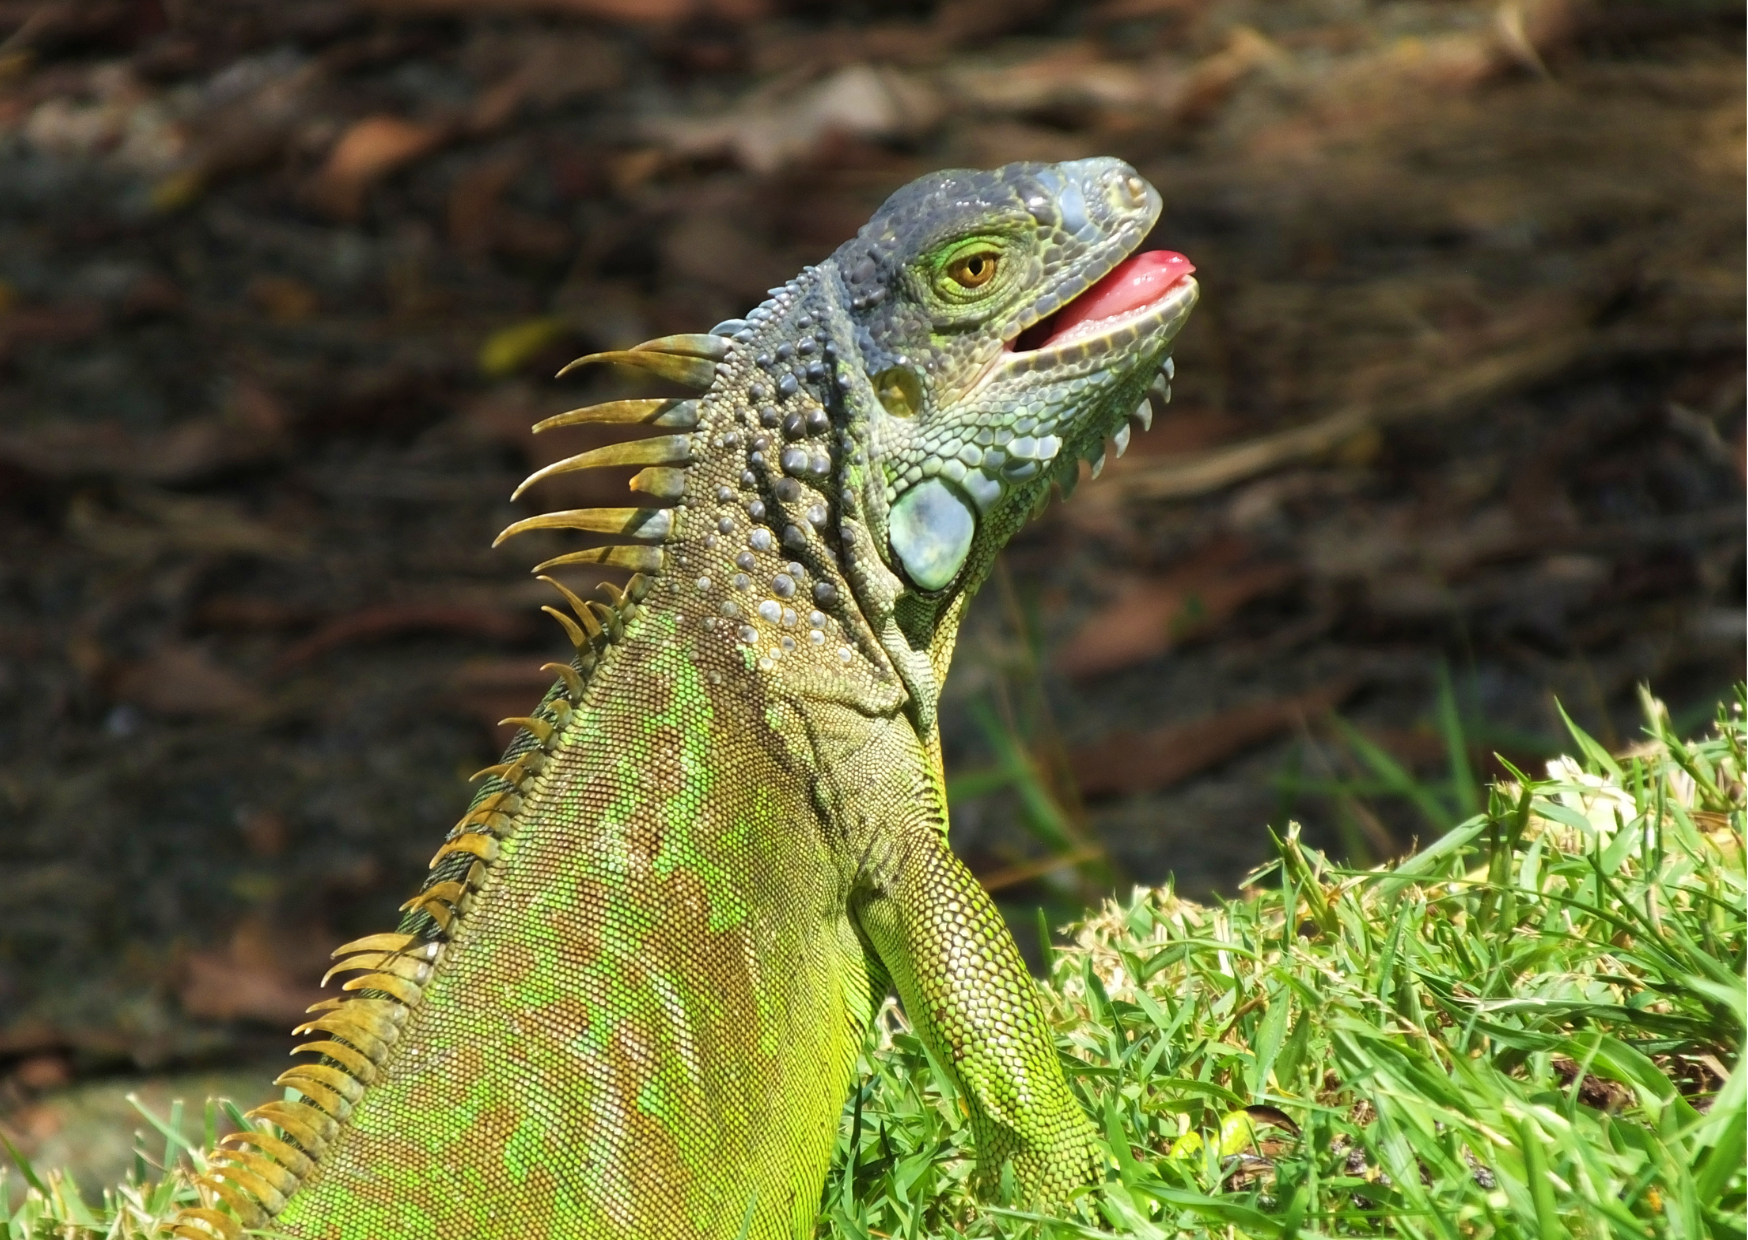 Does my pet reptile sneeze too much?